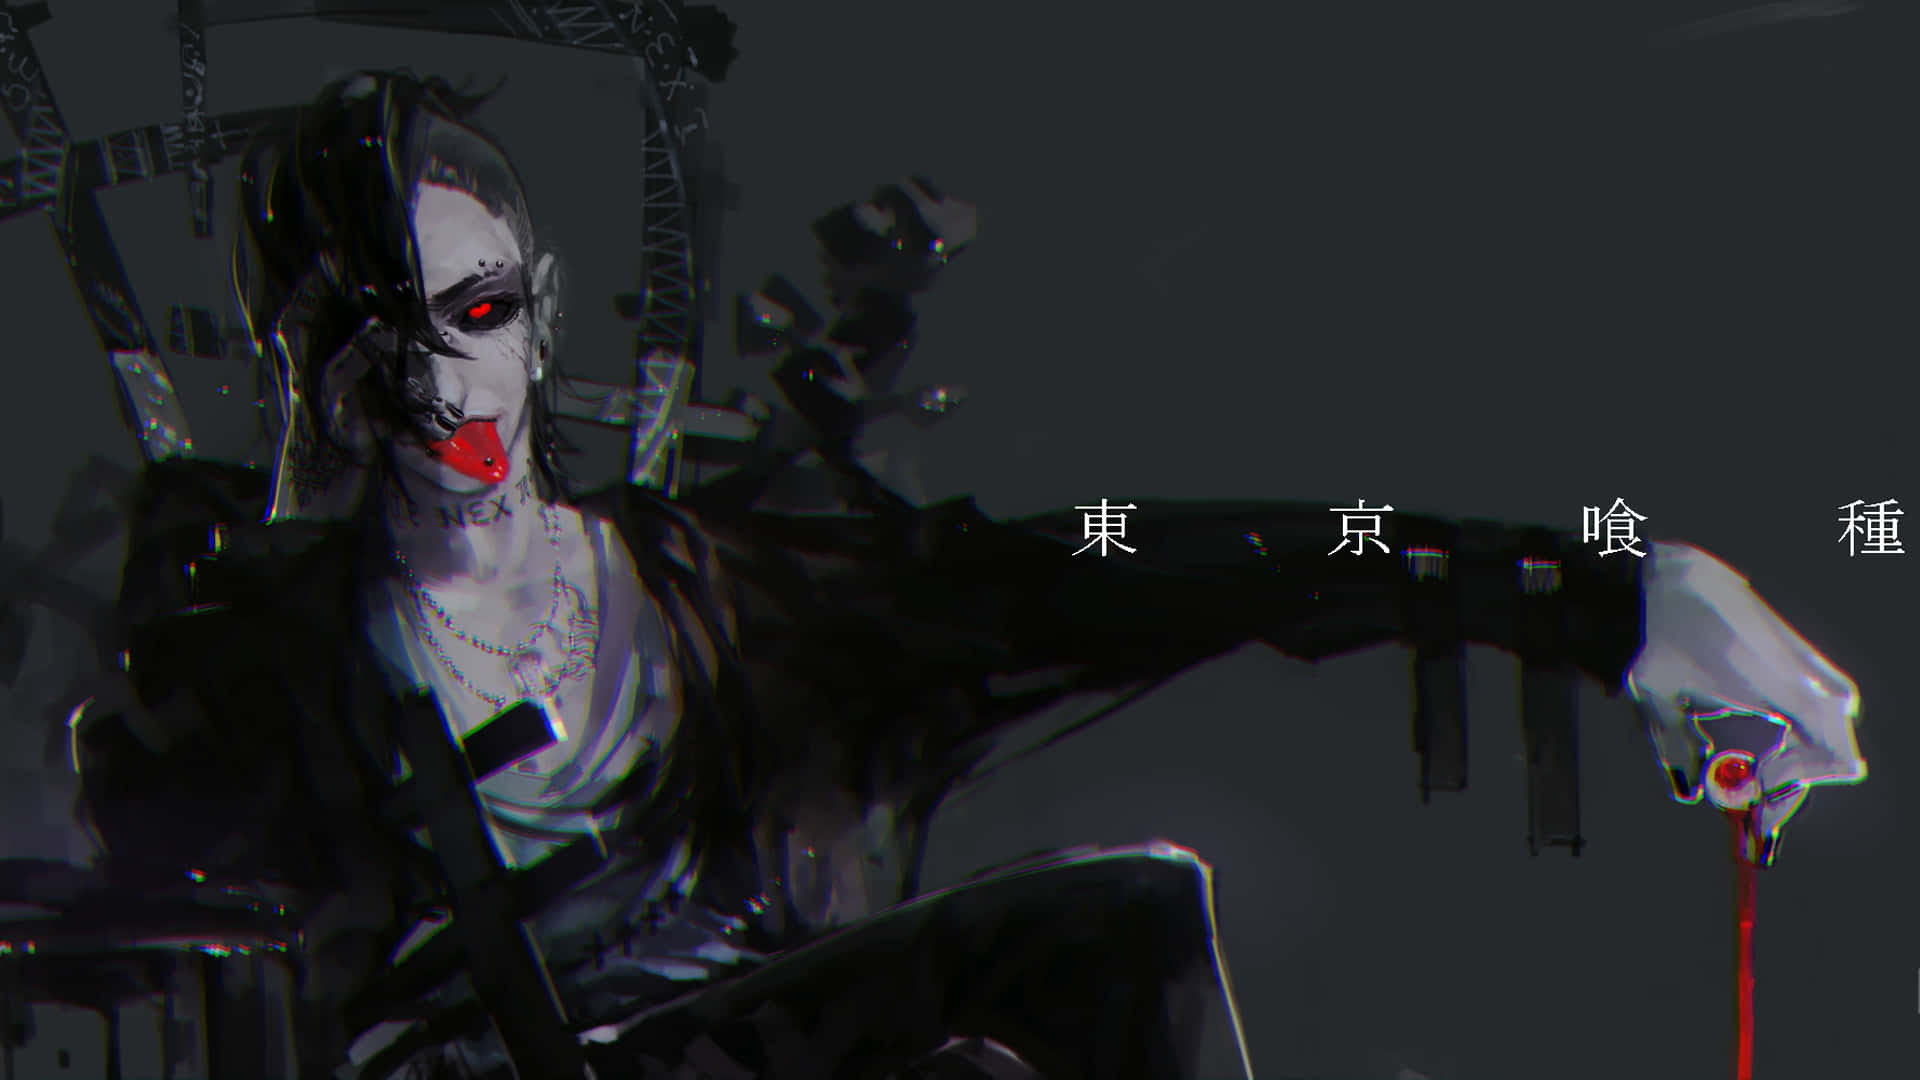 Enigmatic Uta from Tokyo Ghoul in an Intense Stare Wallpaper